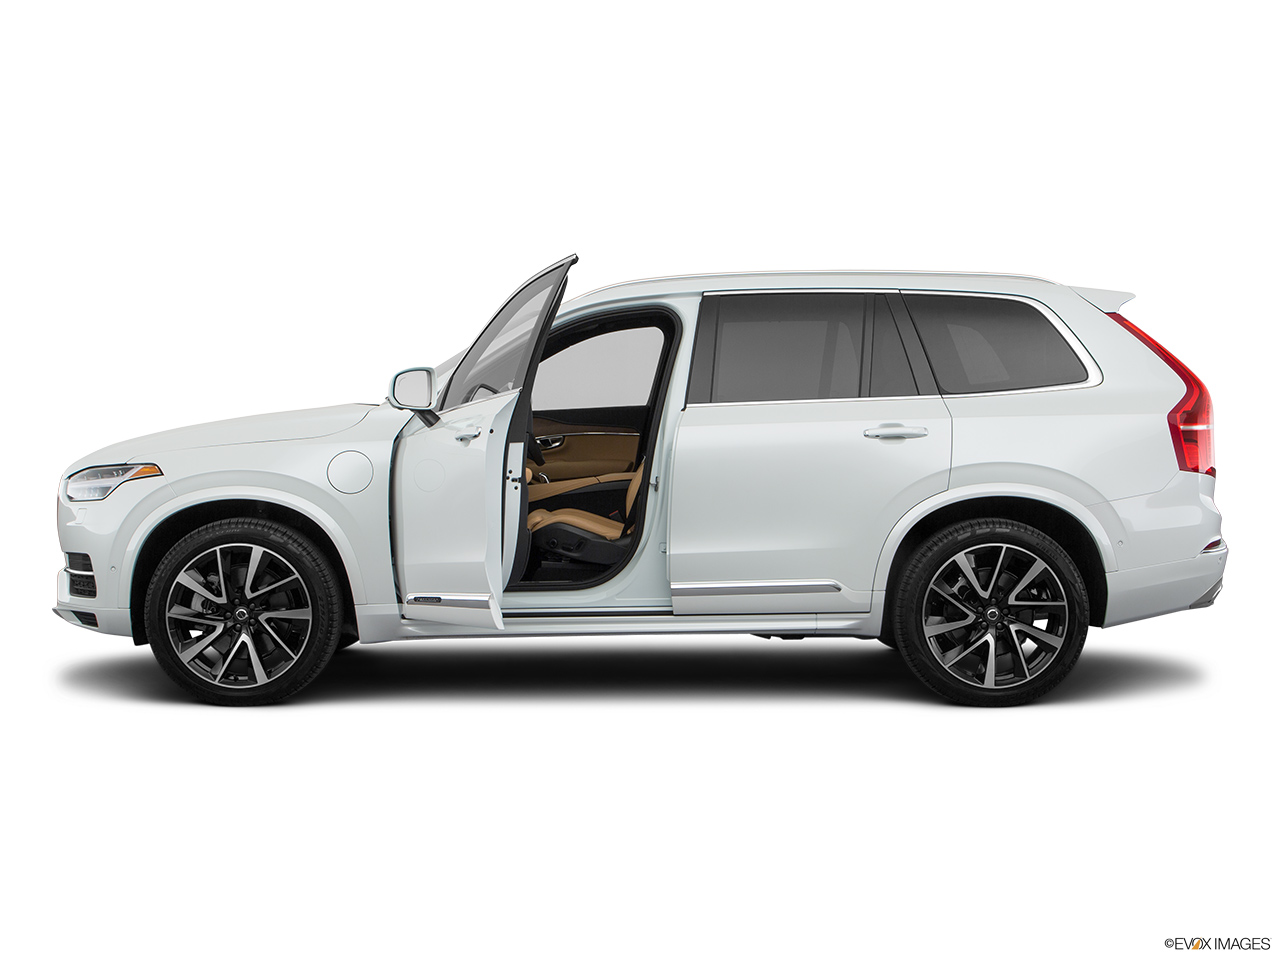 2018 Volvo XC90 T8 Inscription eAWD Plug-in Hybrid Driver's side profile with drivers side door open. 